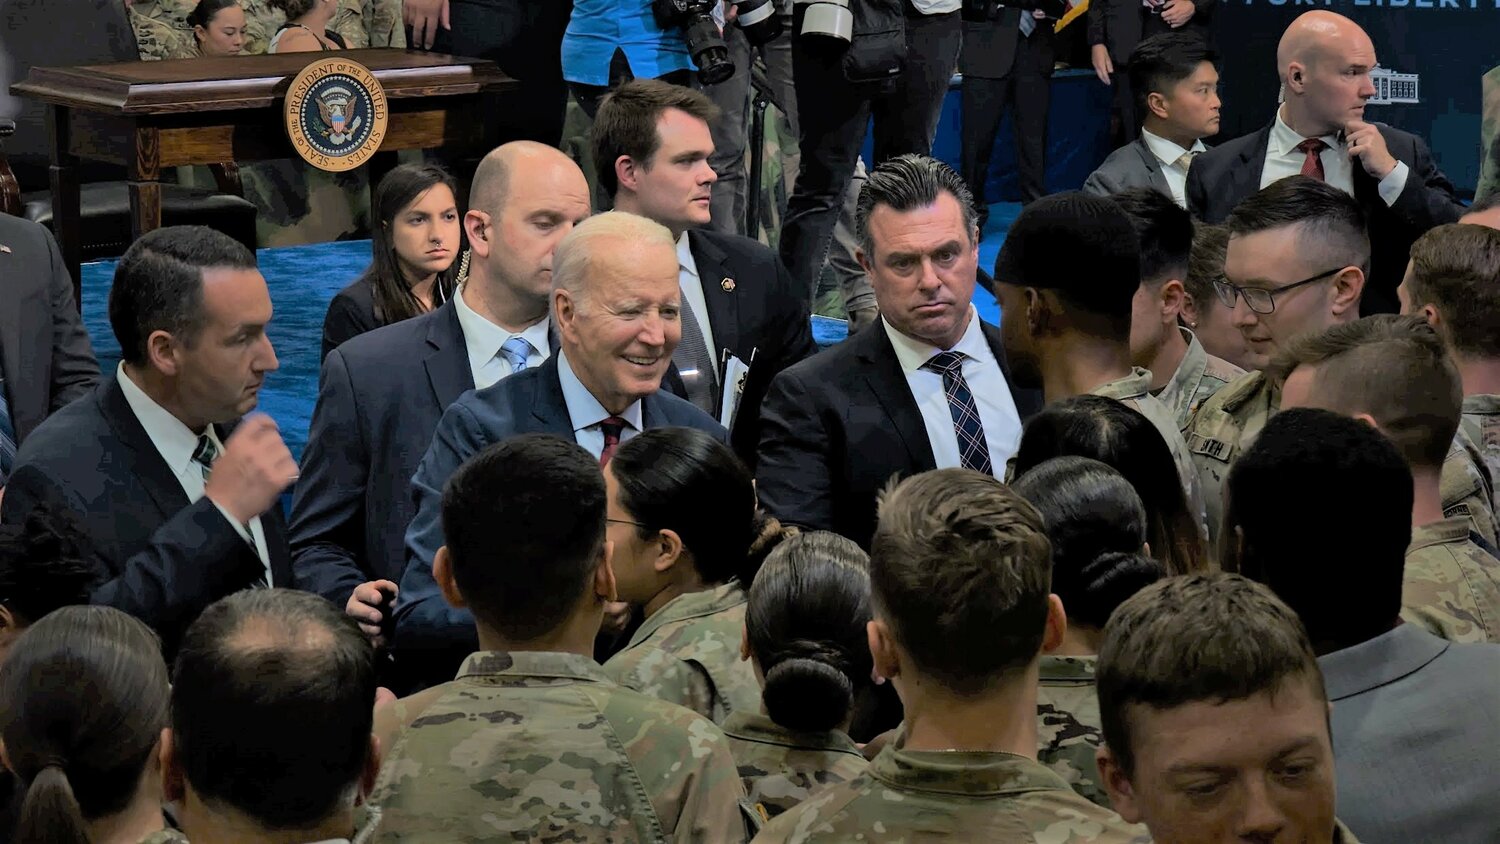 President Joe Biden, following his speech about an executive order on military family support, mingles with military personnel on Friday on Fort Liberty.